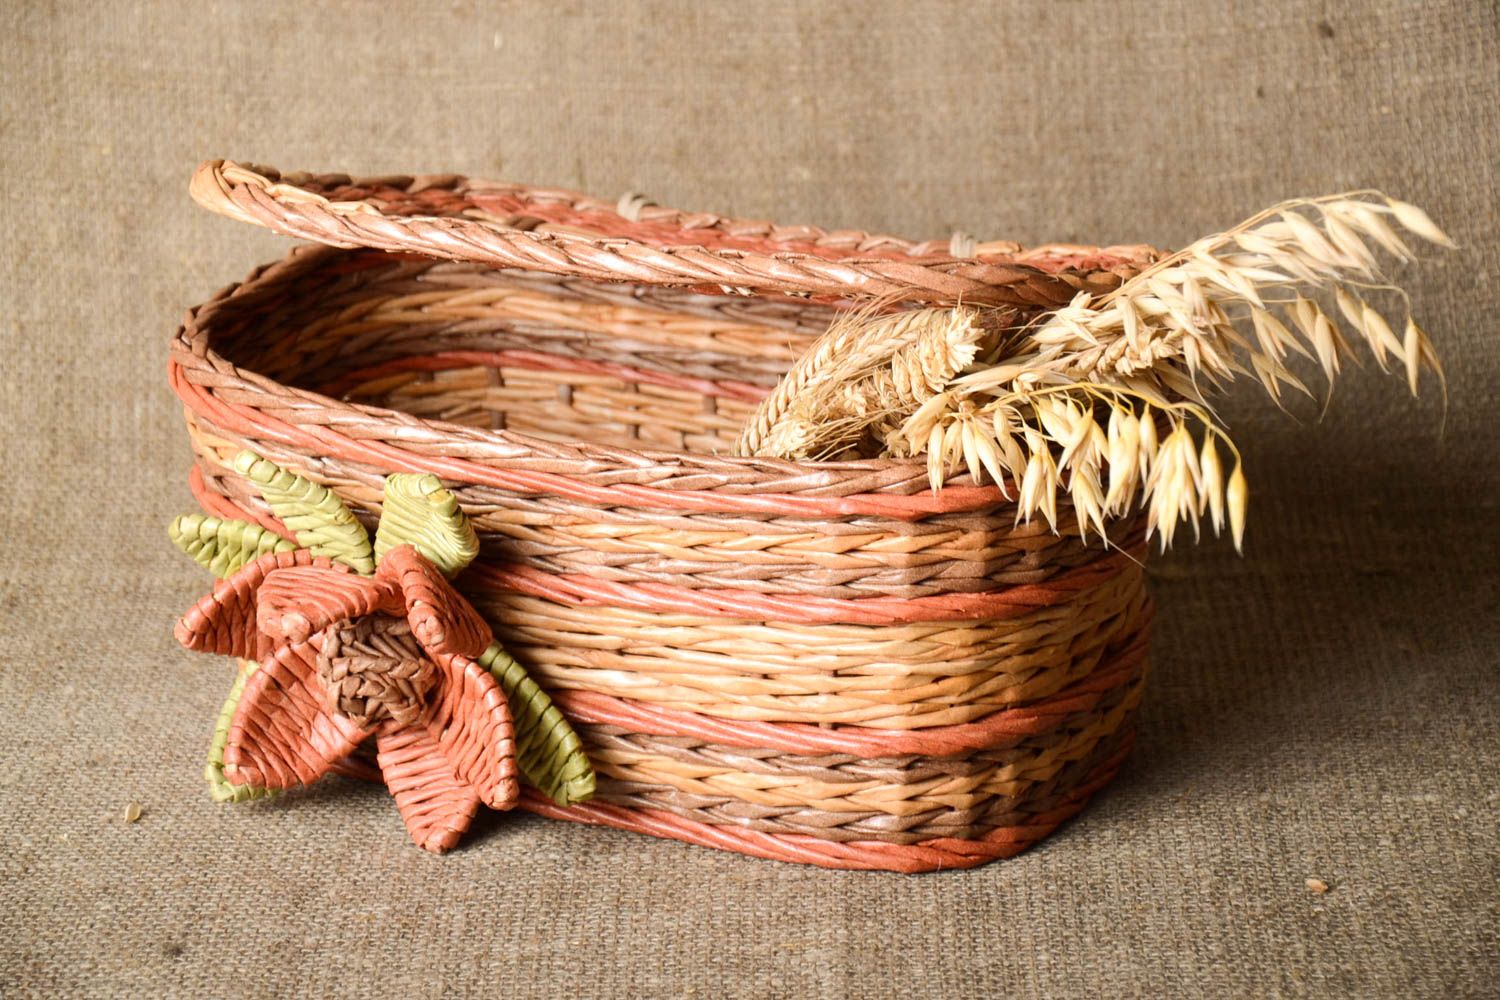 Stylish handmade woven bread basket cute unusual home accessories lovely decor photo 1